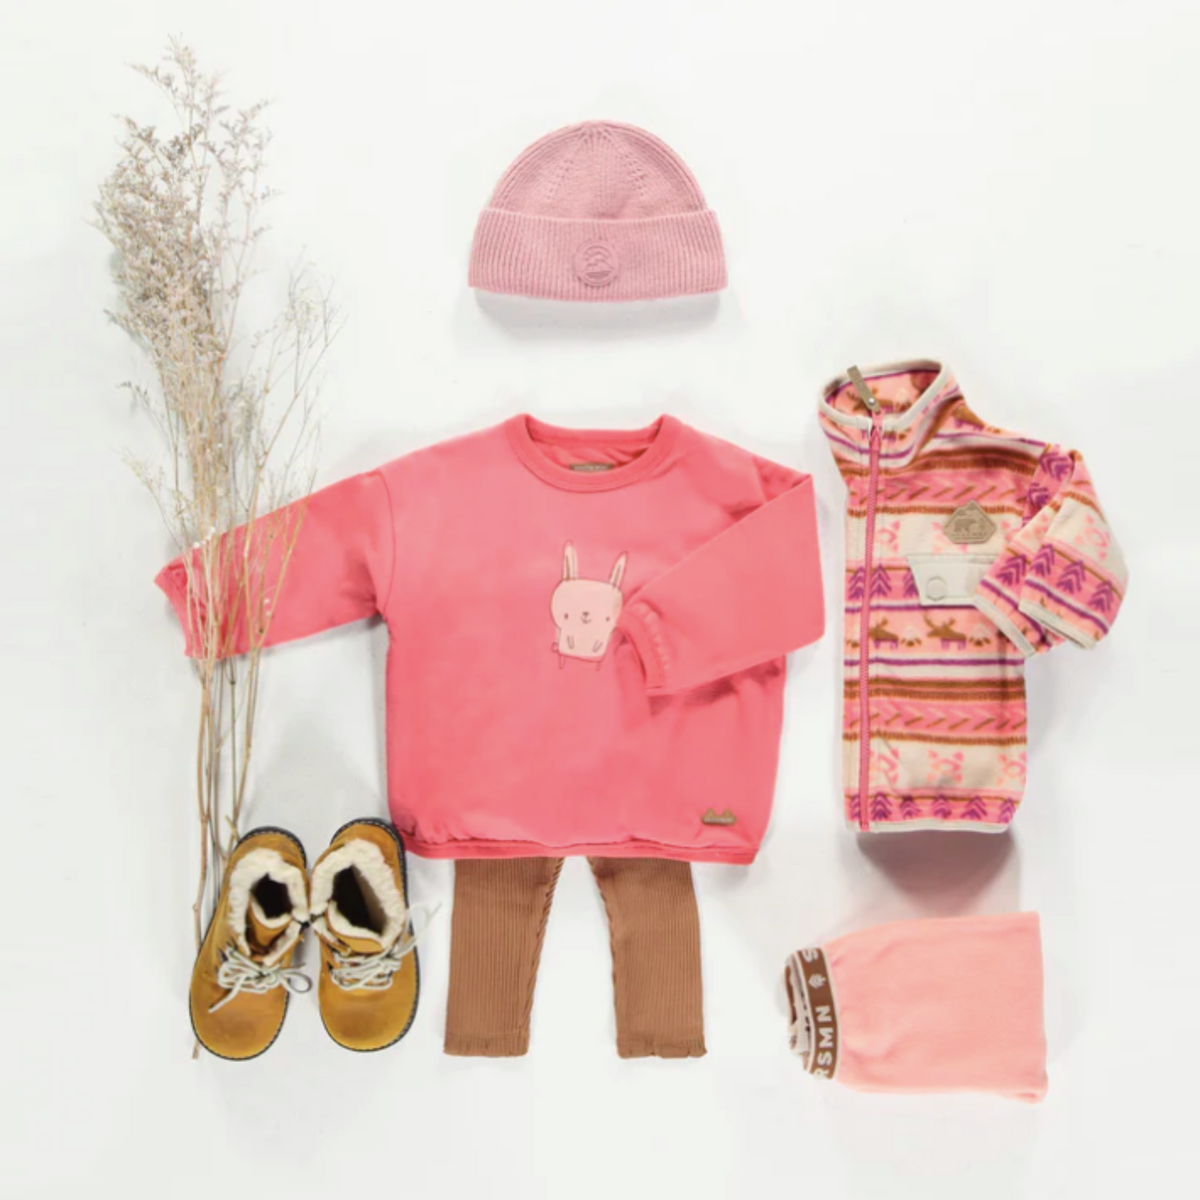 Pink Long Sleeved T-shirt with a Bunny in Soft Jersey, Baby